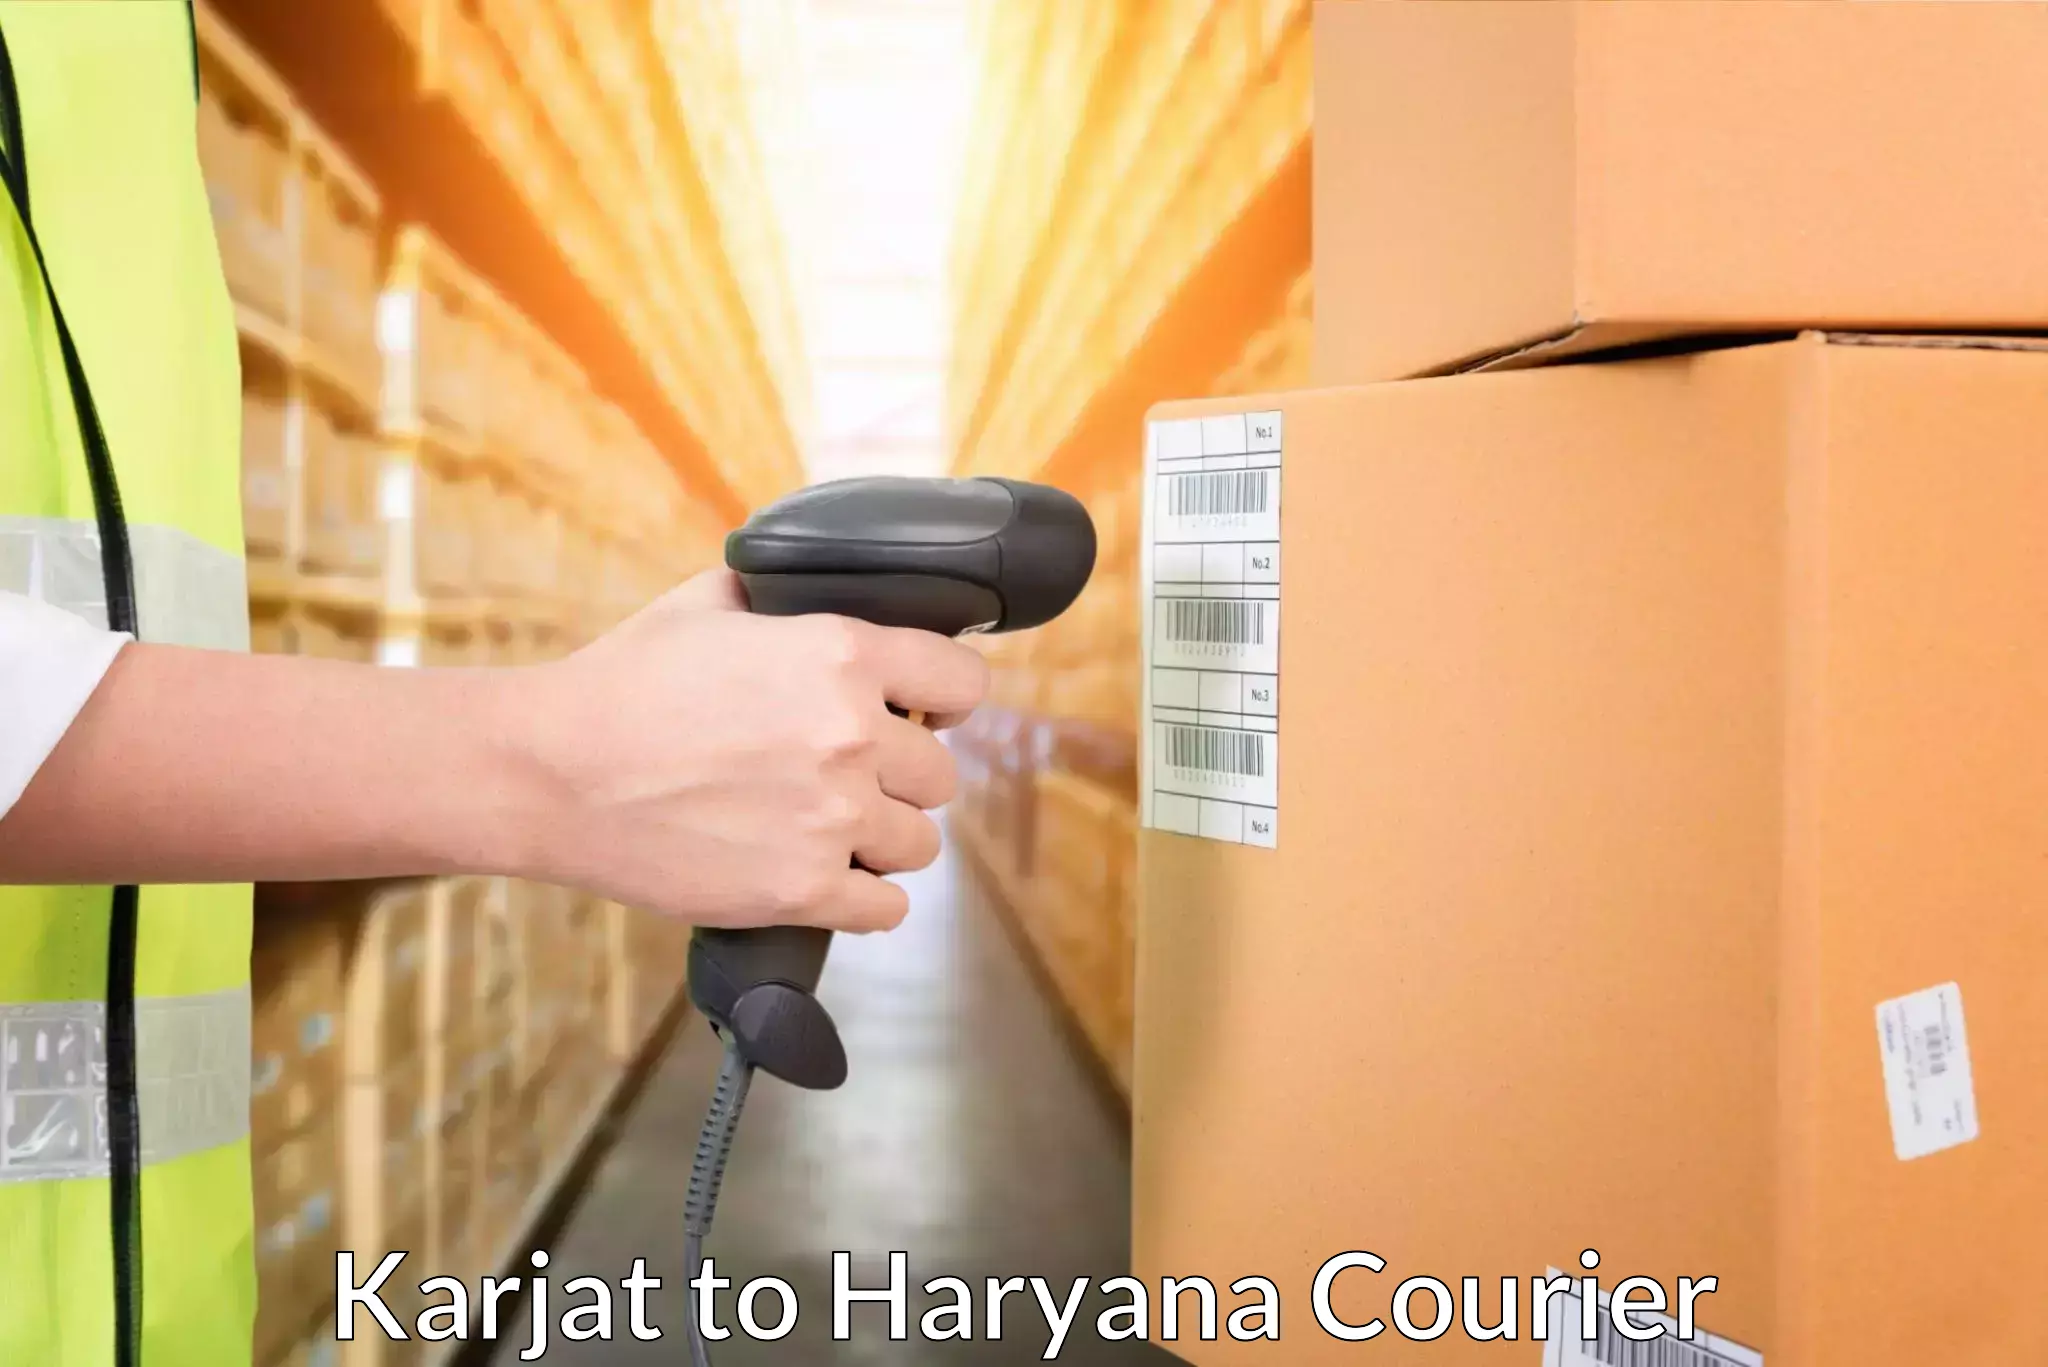 Nationwide shipping coverage in Karjat to Gurgaon